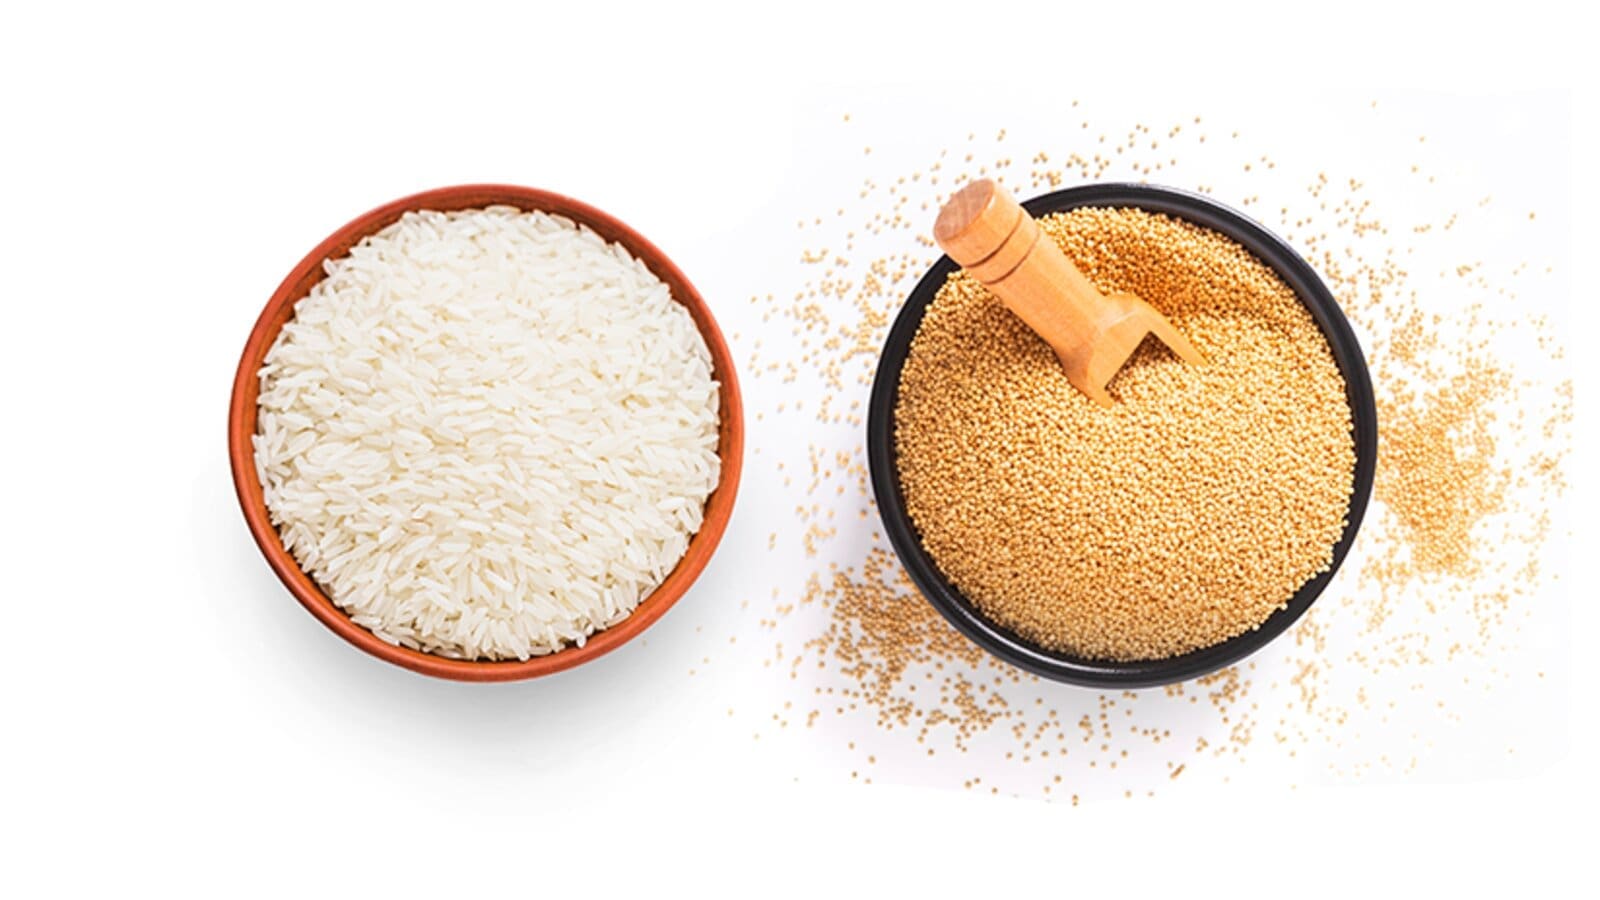 Niger bans millet and rice exports to cushion local supplies, halt inflation